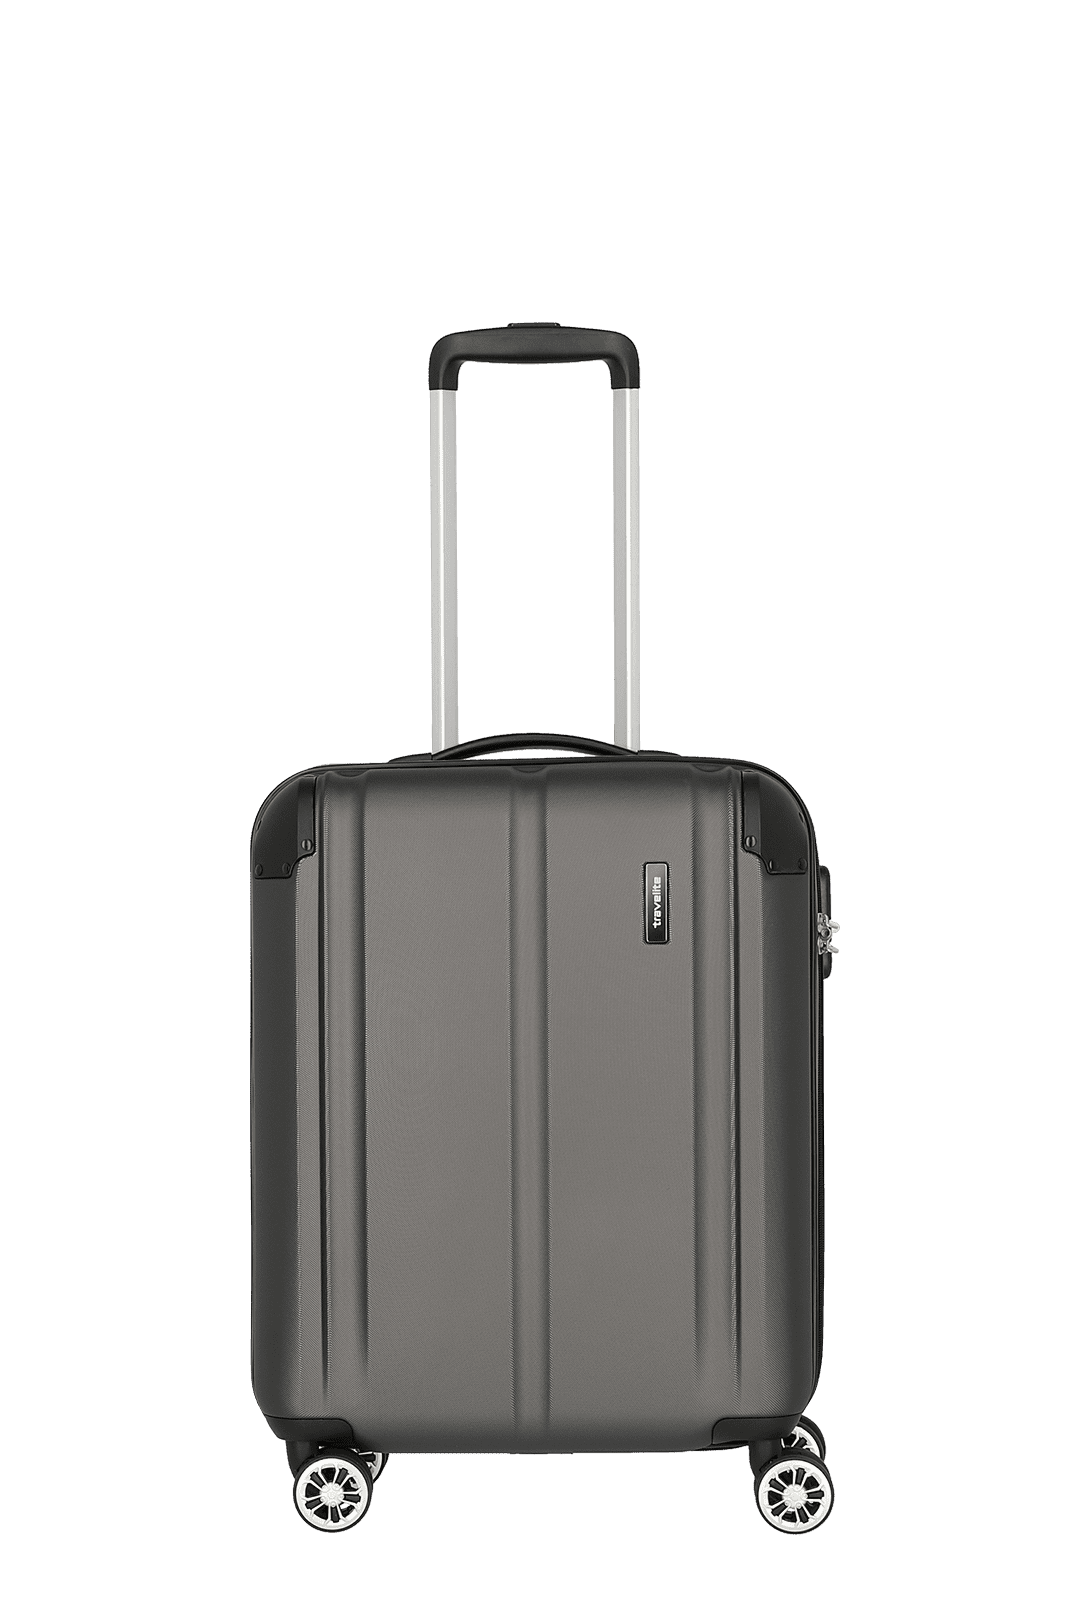 green size (55cm) - suitcase shell color travelite S hard in City